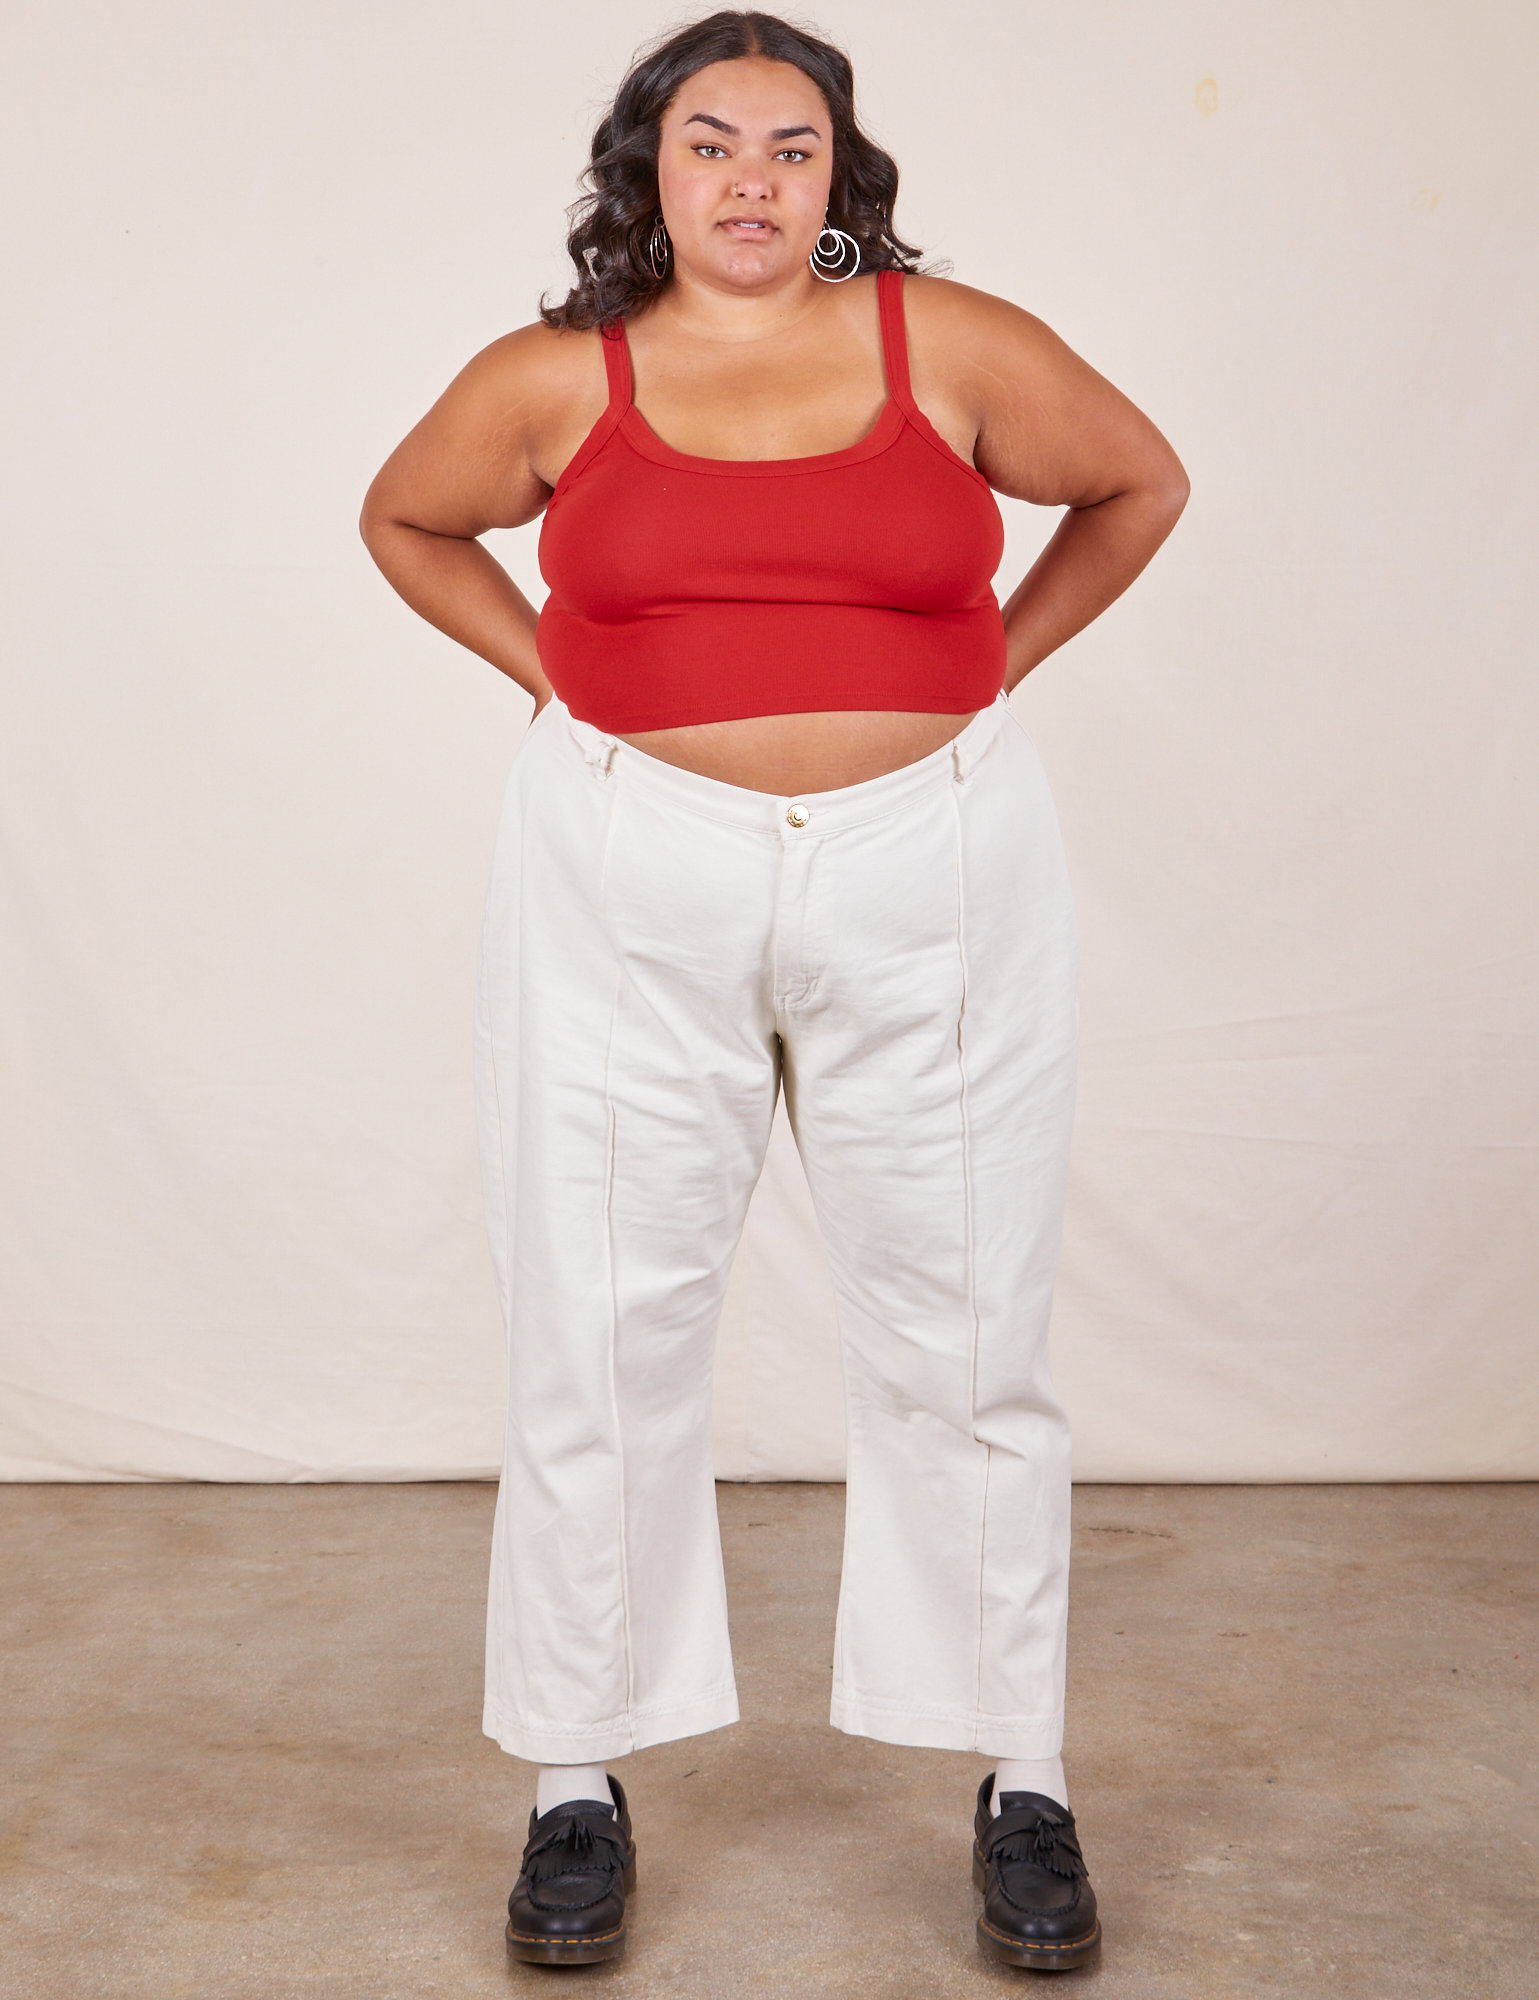 Alicia is wearing Cropped Cami in Mustang Red and vintage tee off-white Western Pants